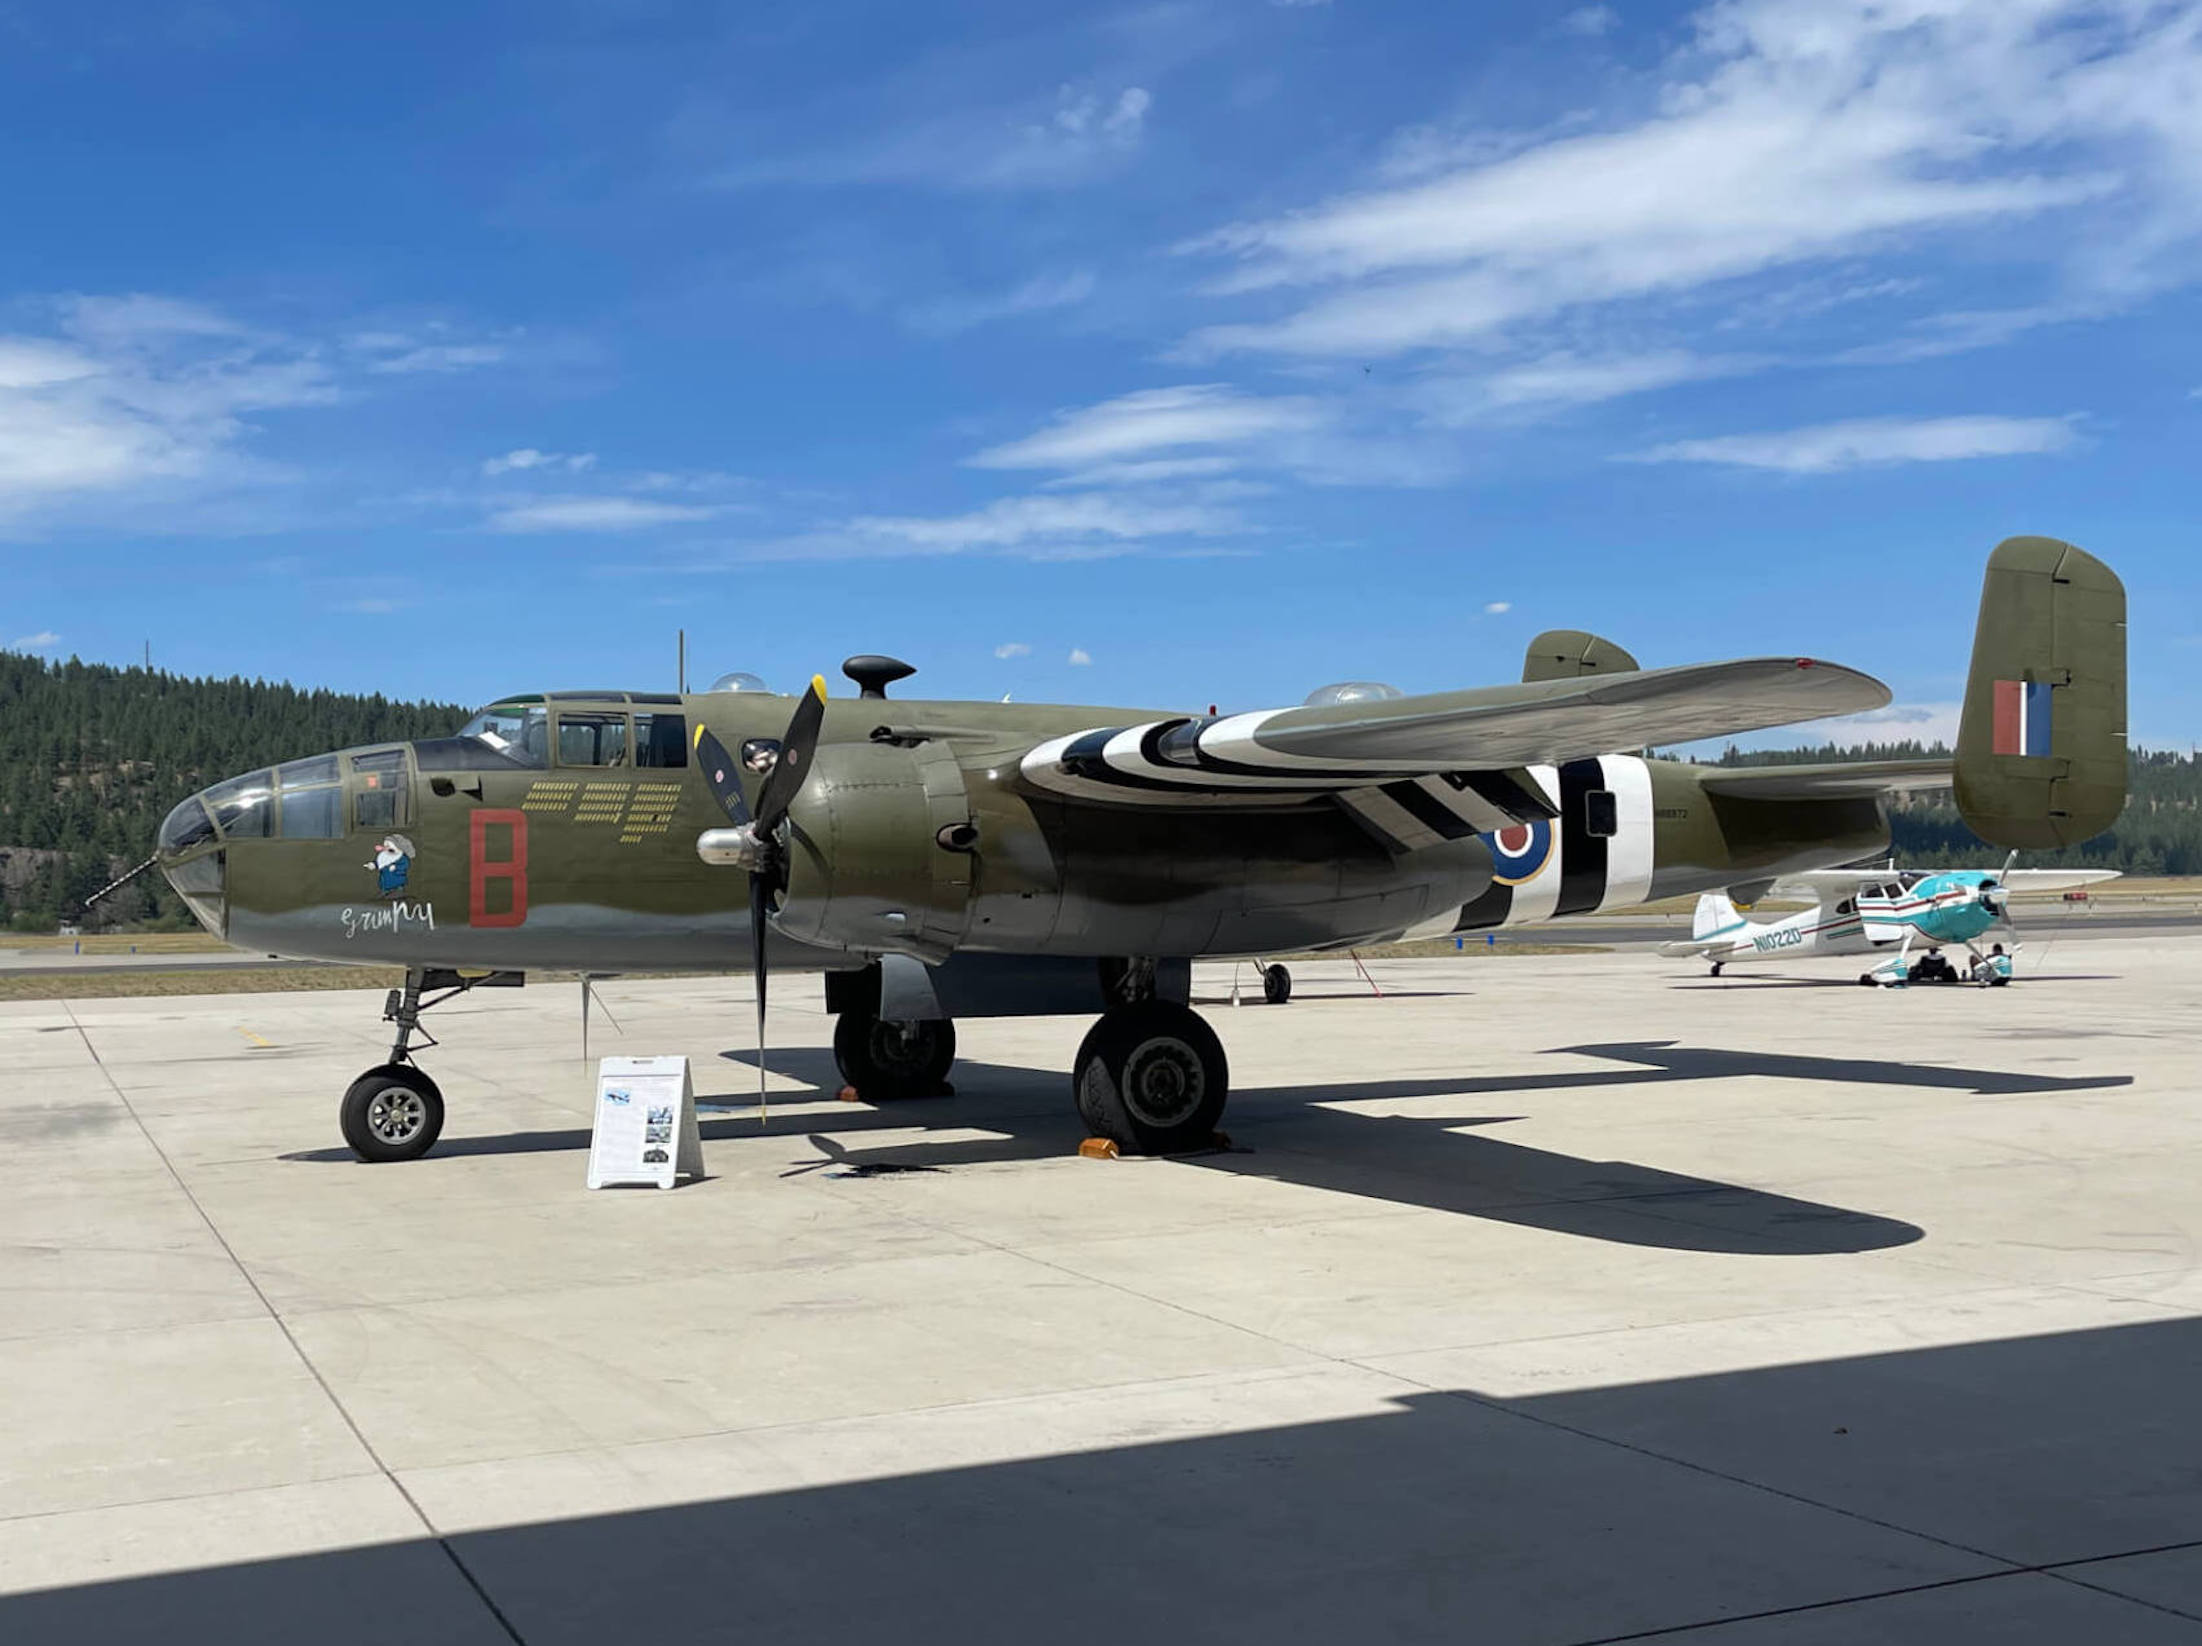 For Sale: A WWII-Veteran North American B-25 Bomber